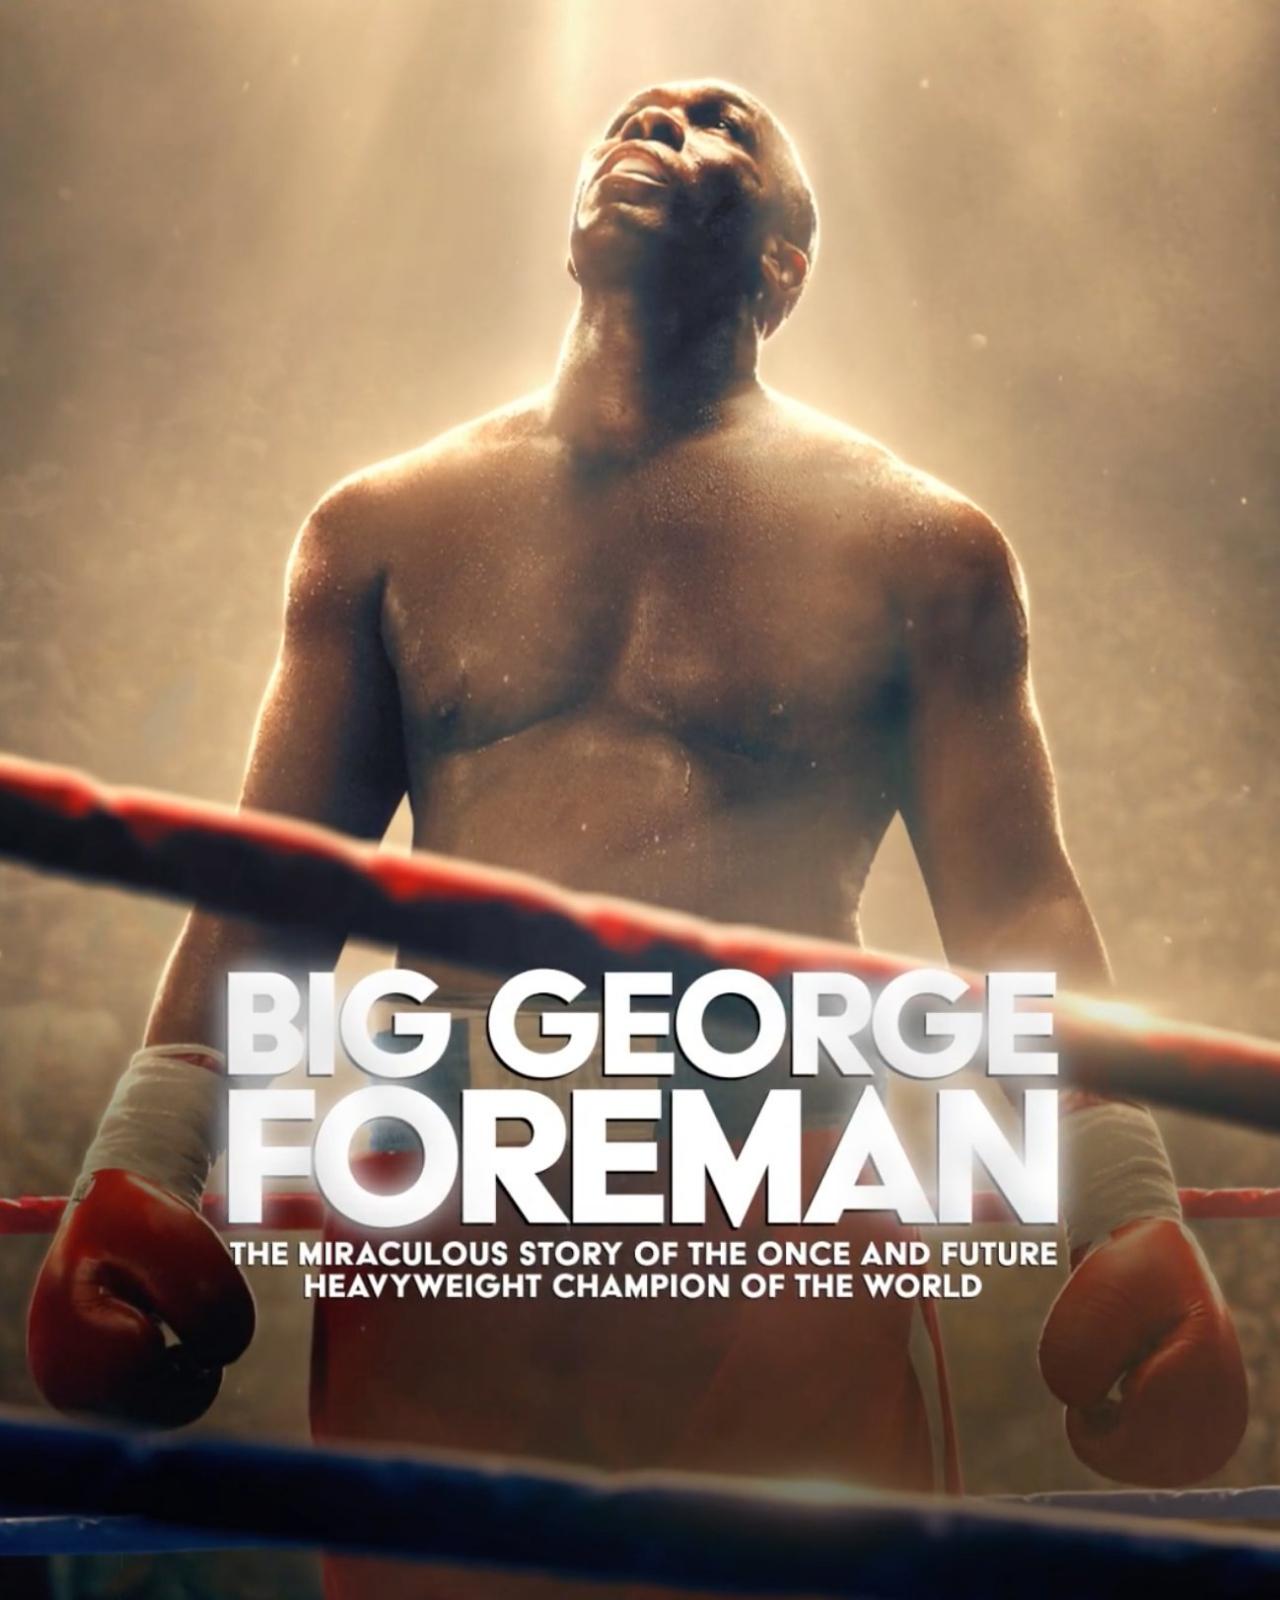 Big George Foreman: This is a sports drama about the legendary boxer George Foreman and it offers a fascinating look at his life and career. With interviews from friends, family, and fellow boxers, this movie is a must-watch for sports fanatics. This miraculous biopic deserves to be seen on the big screen and we absolutely cannot wait. The film is slated to release on May 26.